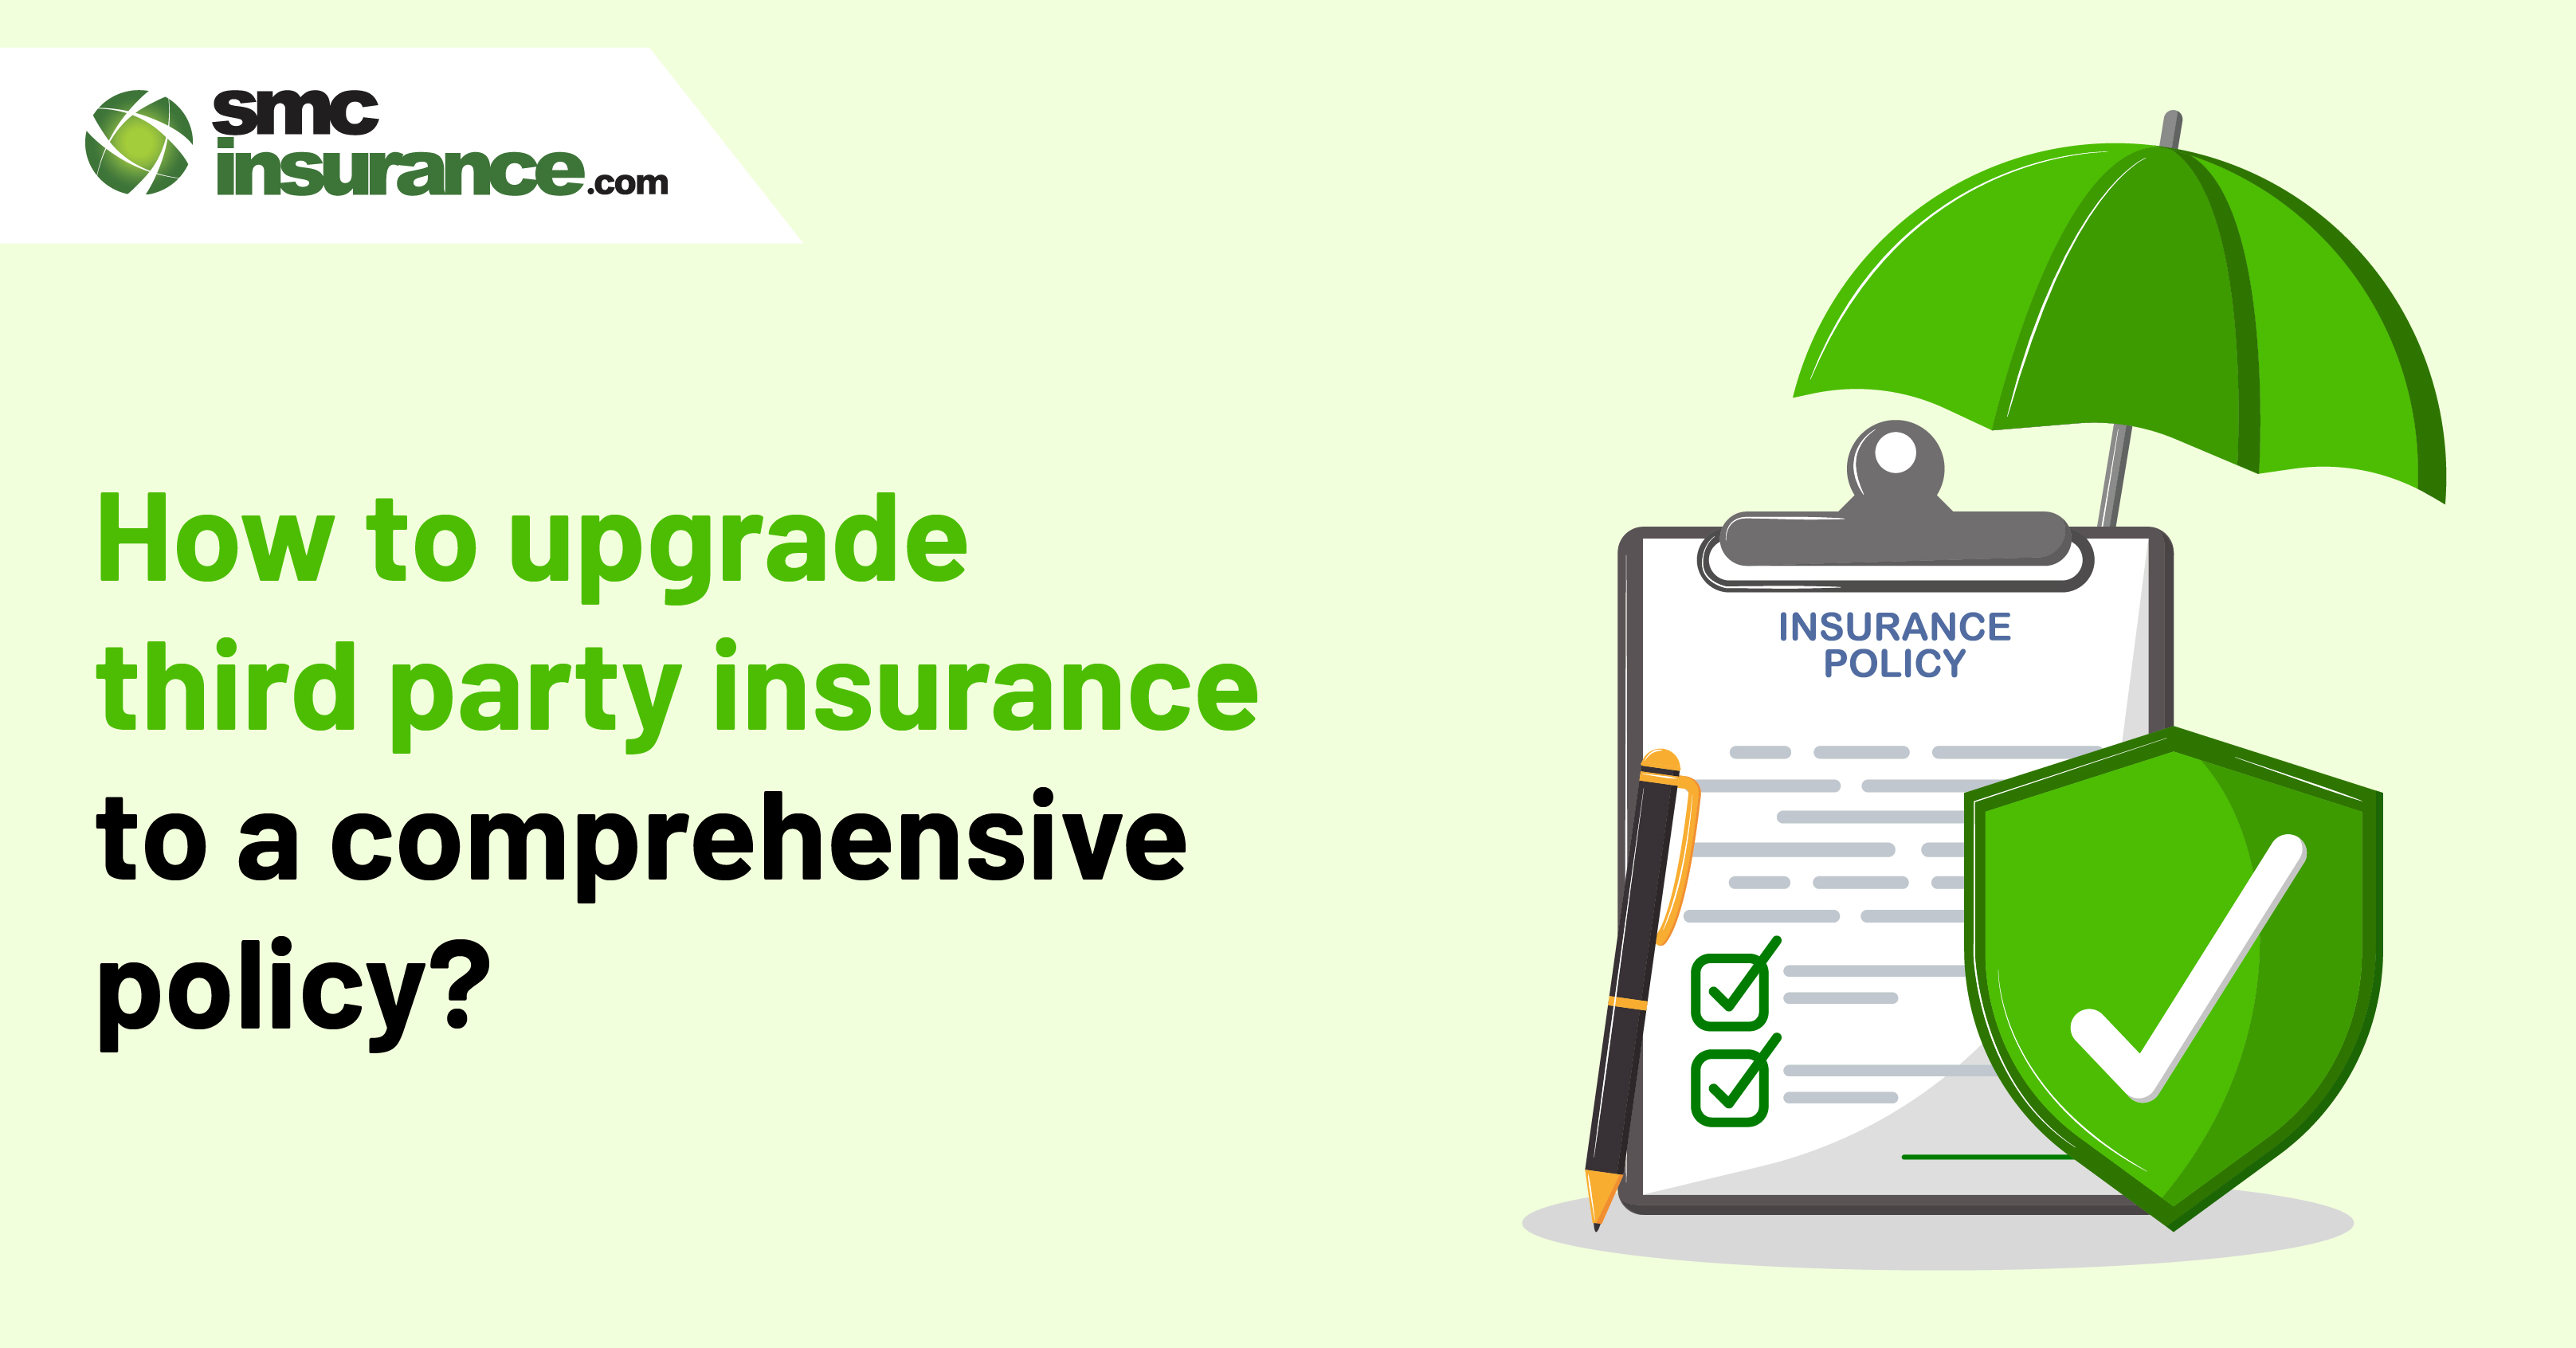 How To Upgrade Third Party Insurance To A Comprehensive Policy?